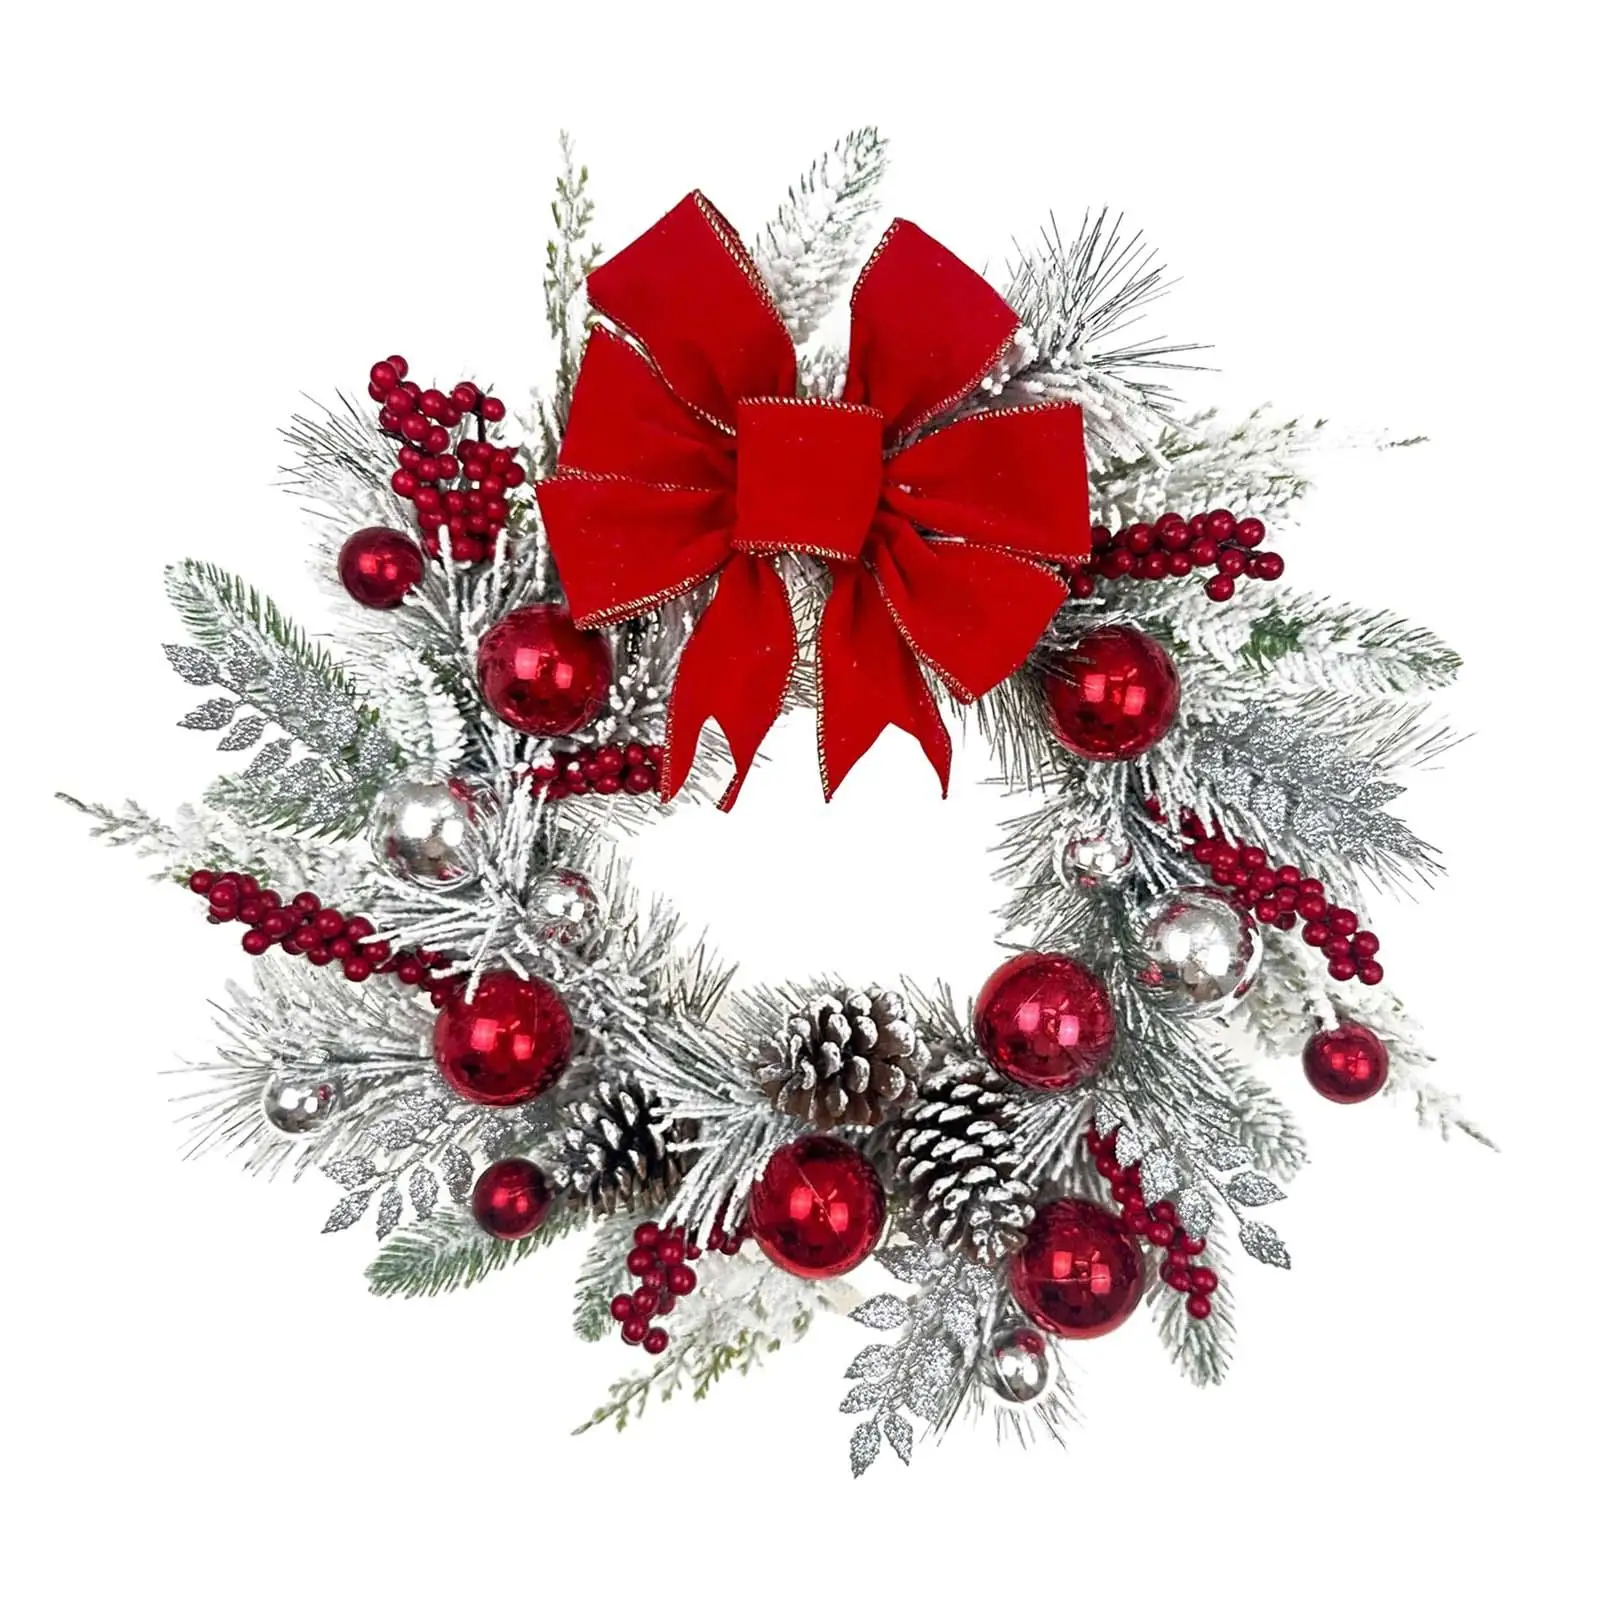 Christmas Wreath Decorative Realistic Hanging Ornament Garland Front Door Winter Wreath for House Office Wedding Xmas Decor